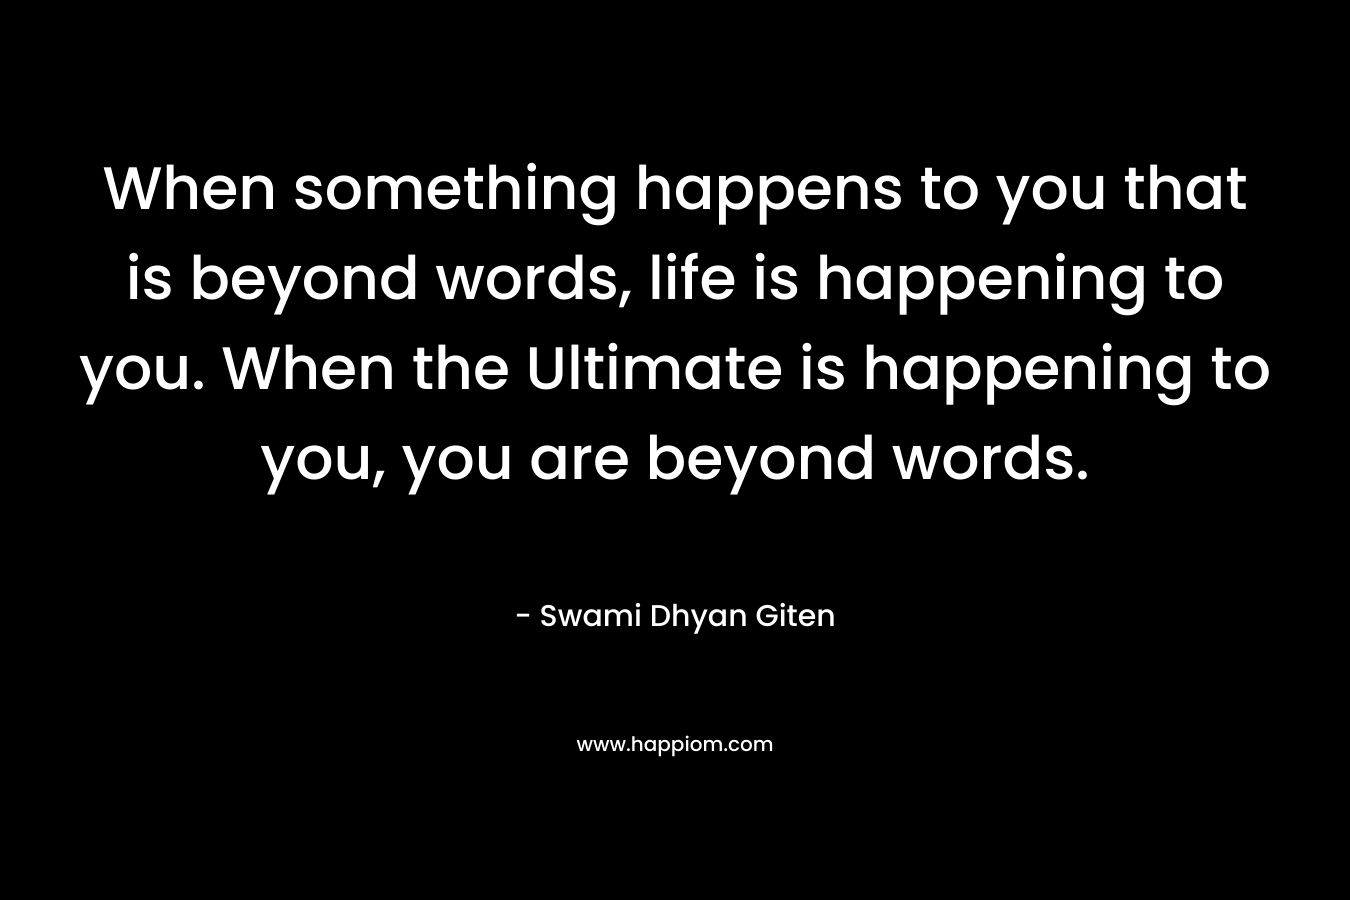 When something happens to you that is beyond words, life is happening to you. When the Ultimate is happening to you, you are beyond words.